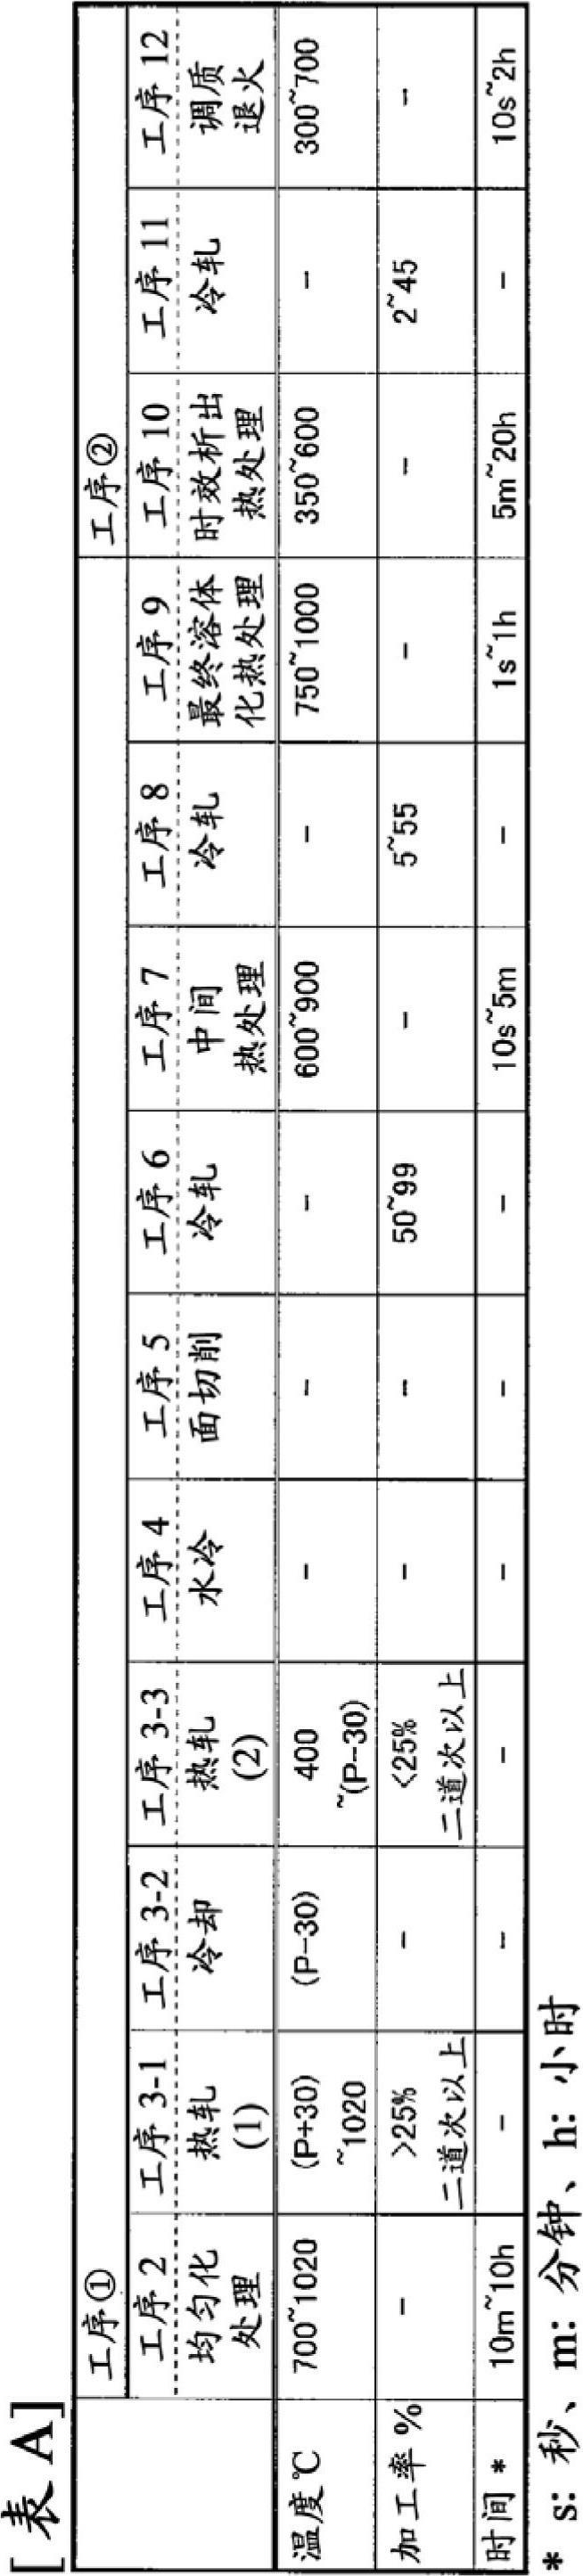 Copper alloy sheet and process for producing same